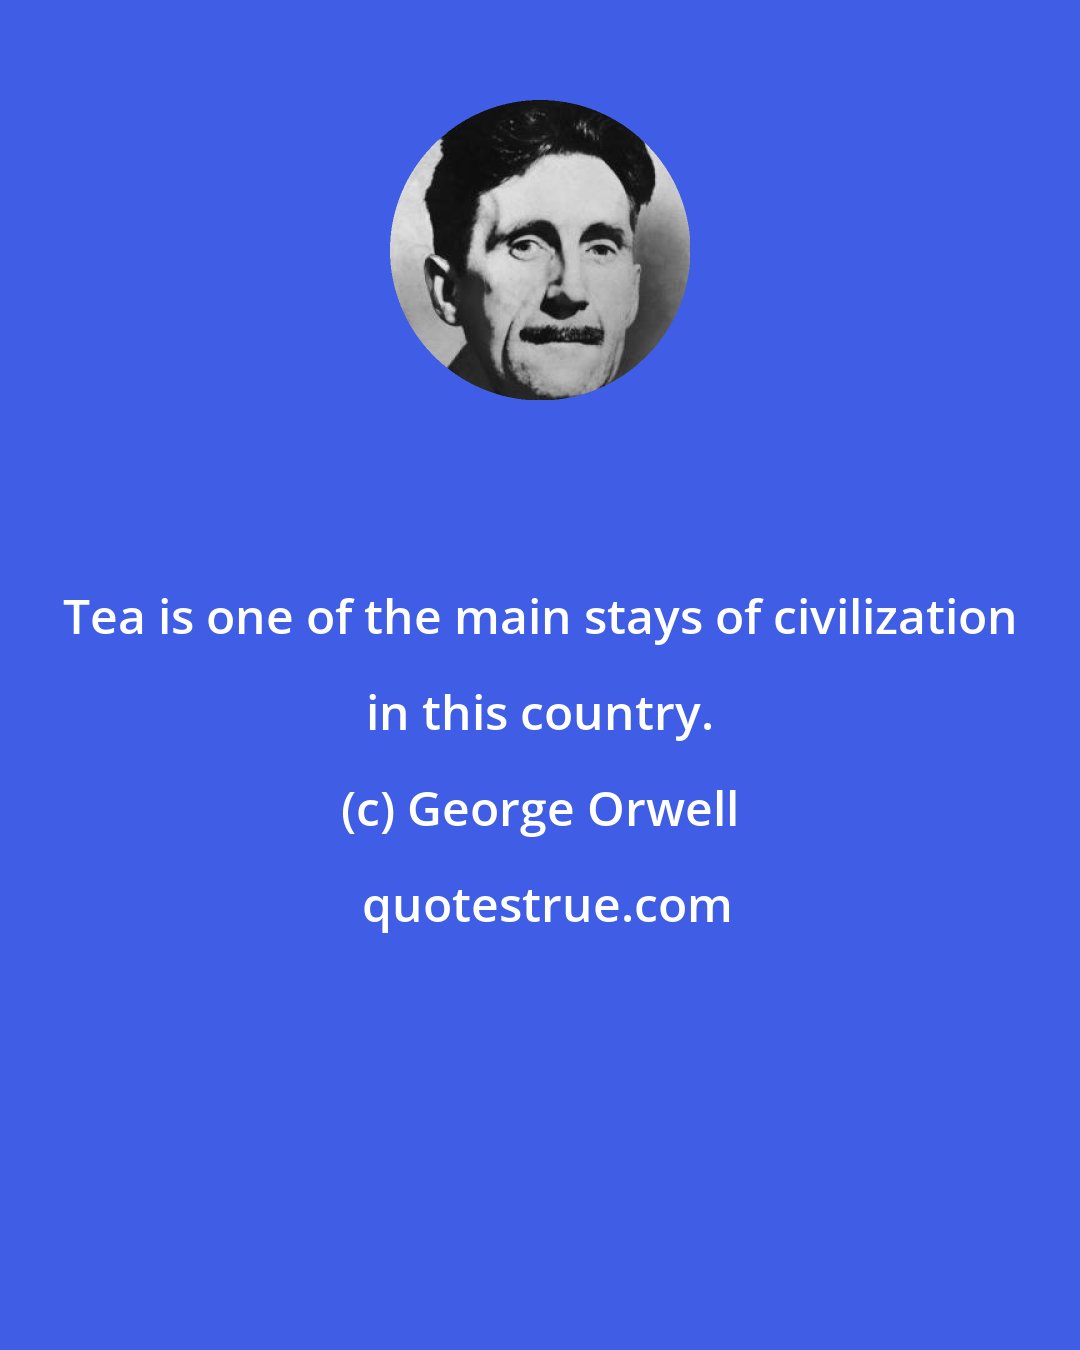 George Orwell: Tea is one of the main stays of civilization in this country.